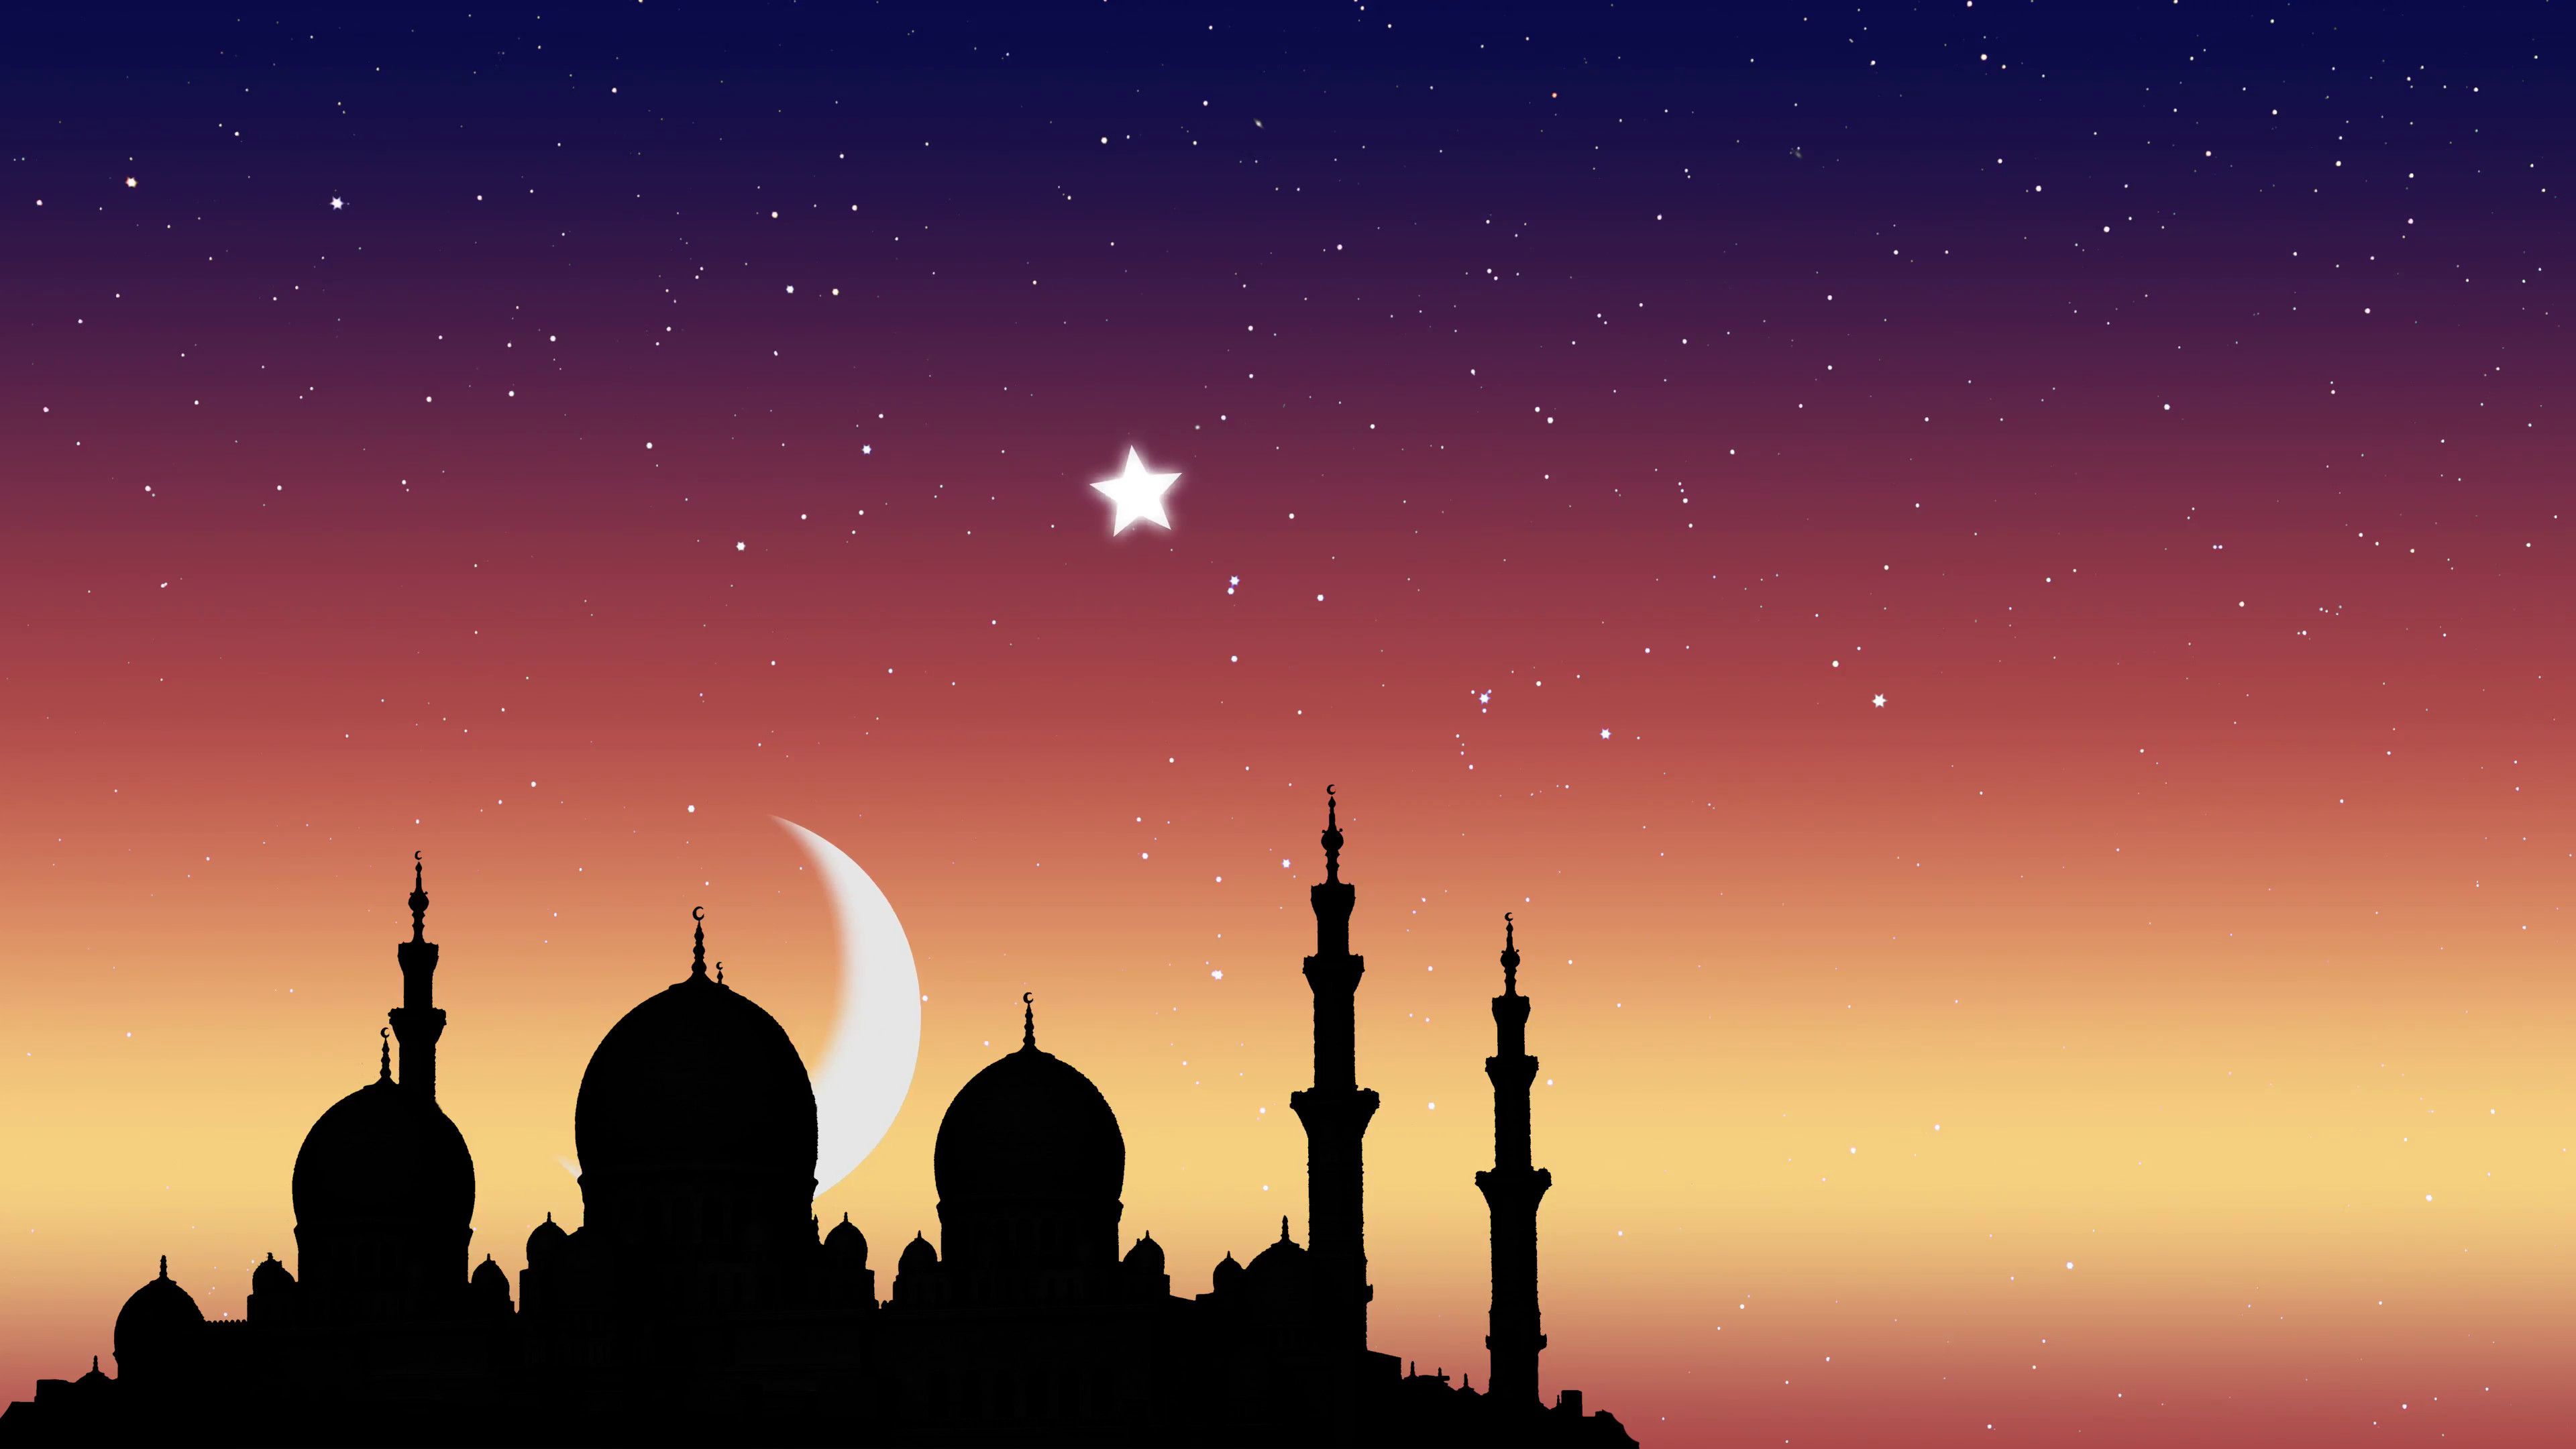 night mosque symbol, moon star background hd photo download